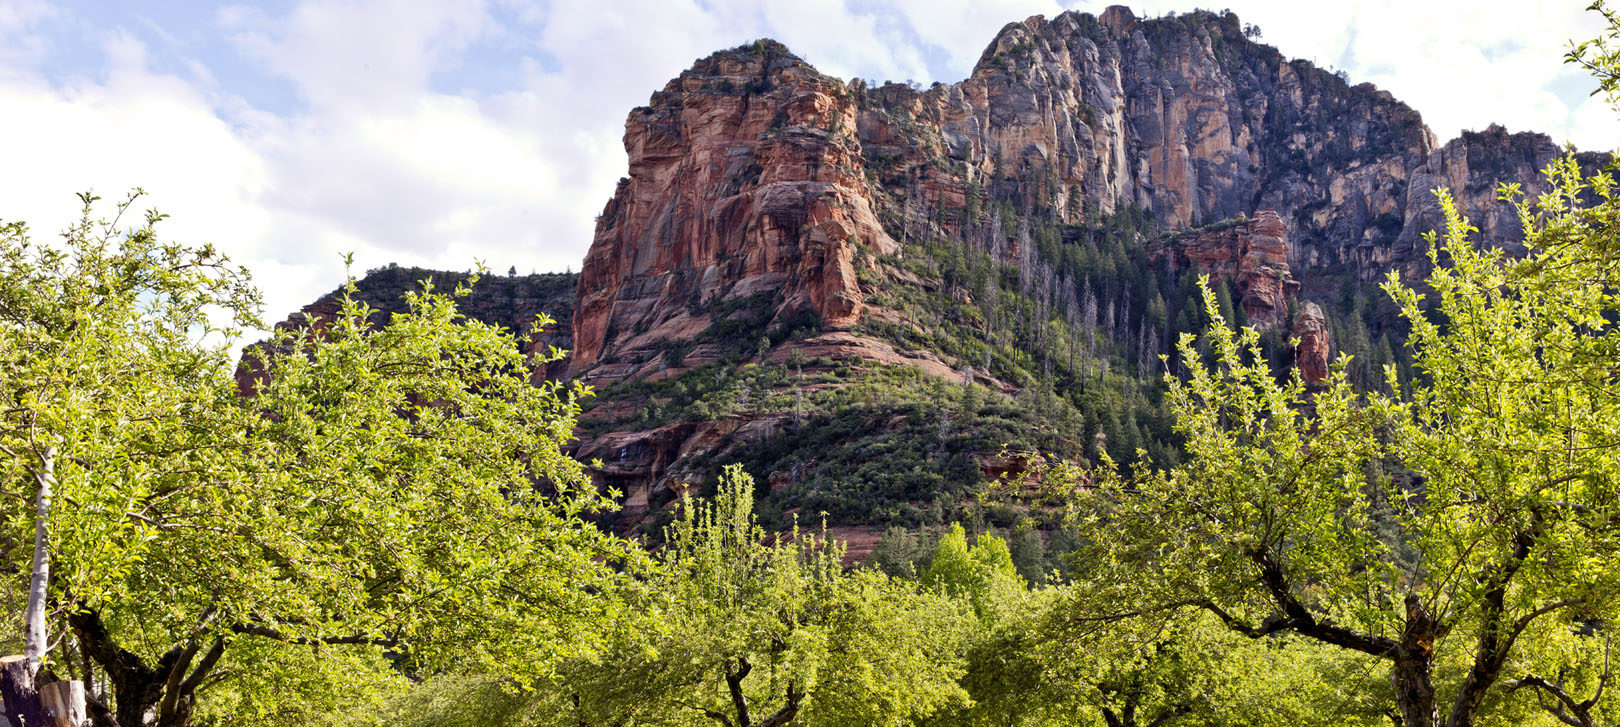 A view of the apple orchard and red rock mountain at Slide Rock State Park